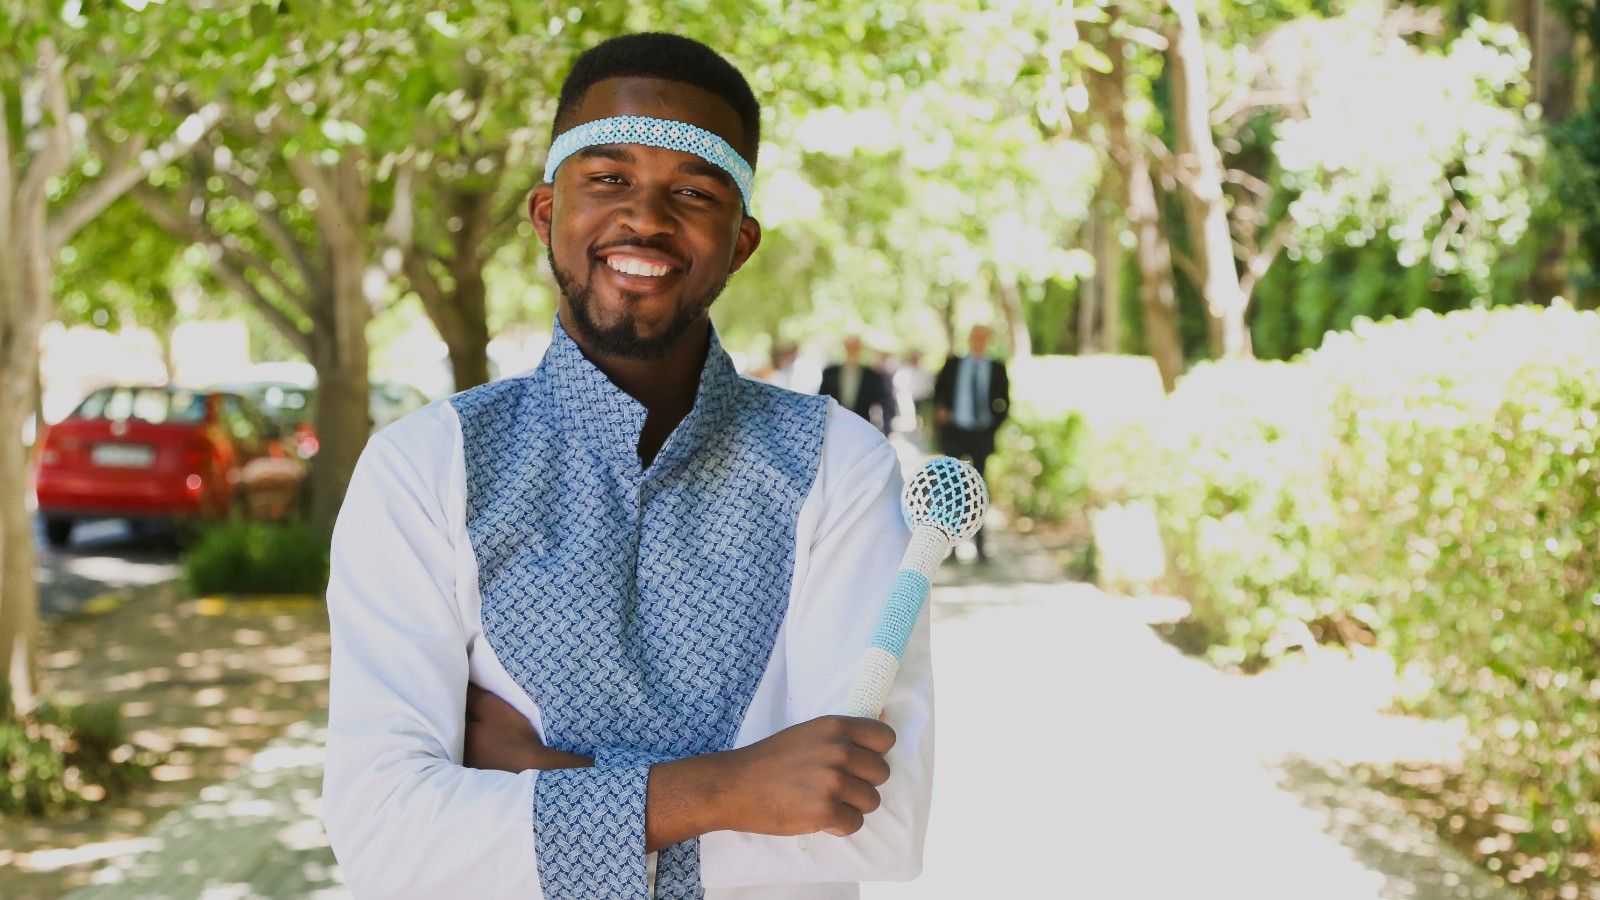 Dell Young Leaders alum Amahle stands outdoors in South Africa